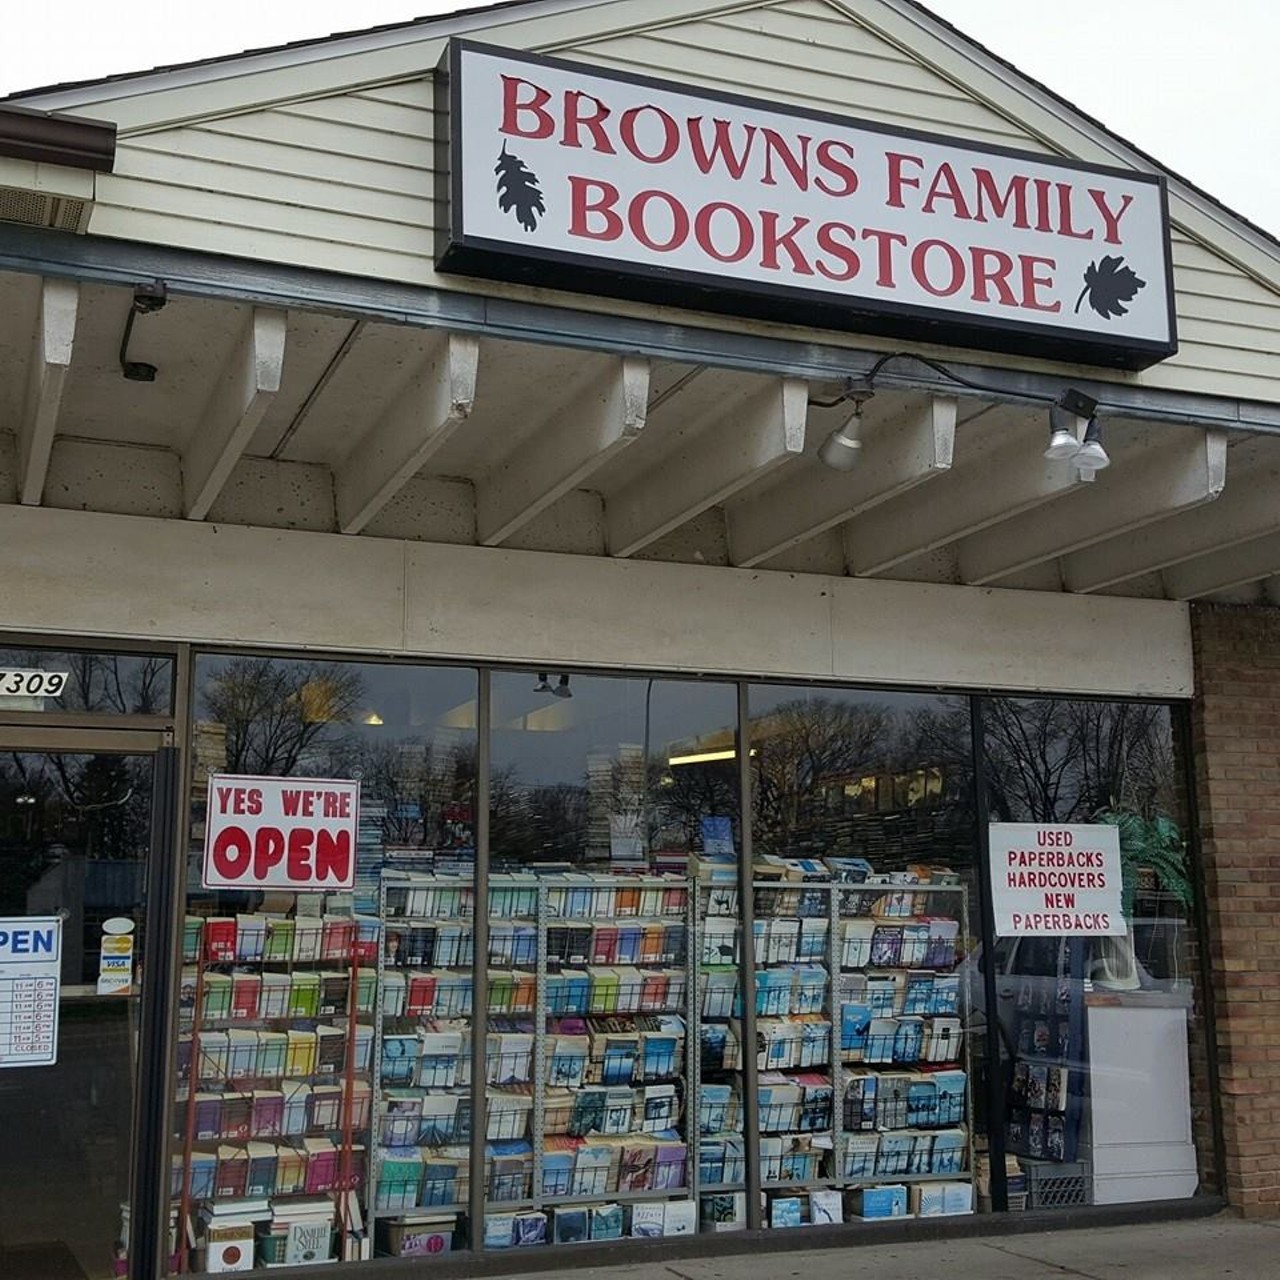 Browns Family Books
27309 Harper Ave., St. Clair Shores; 586-773-7370; facebook.com/brownsfamilybookstore
Located in a strip mall in St. Clair Shores, Brown's is the sort of place you'd pass right by unless someone told you it was worth a stop which is what we're doing right now.  Step inside the shop and you'll find stacks on stacks of books packed nice and tight for your browsing pleasure. With helpful store owners and that great "old book smell," Brown's Family Bookstore is well-stocked with both old and new books for every bookworm.
Photo via Browns Family Books/Facebook